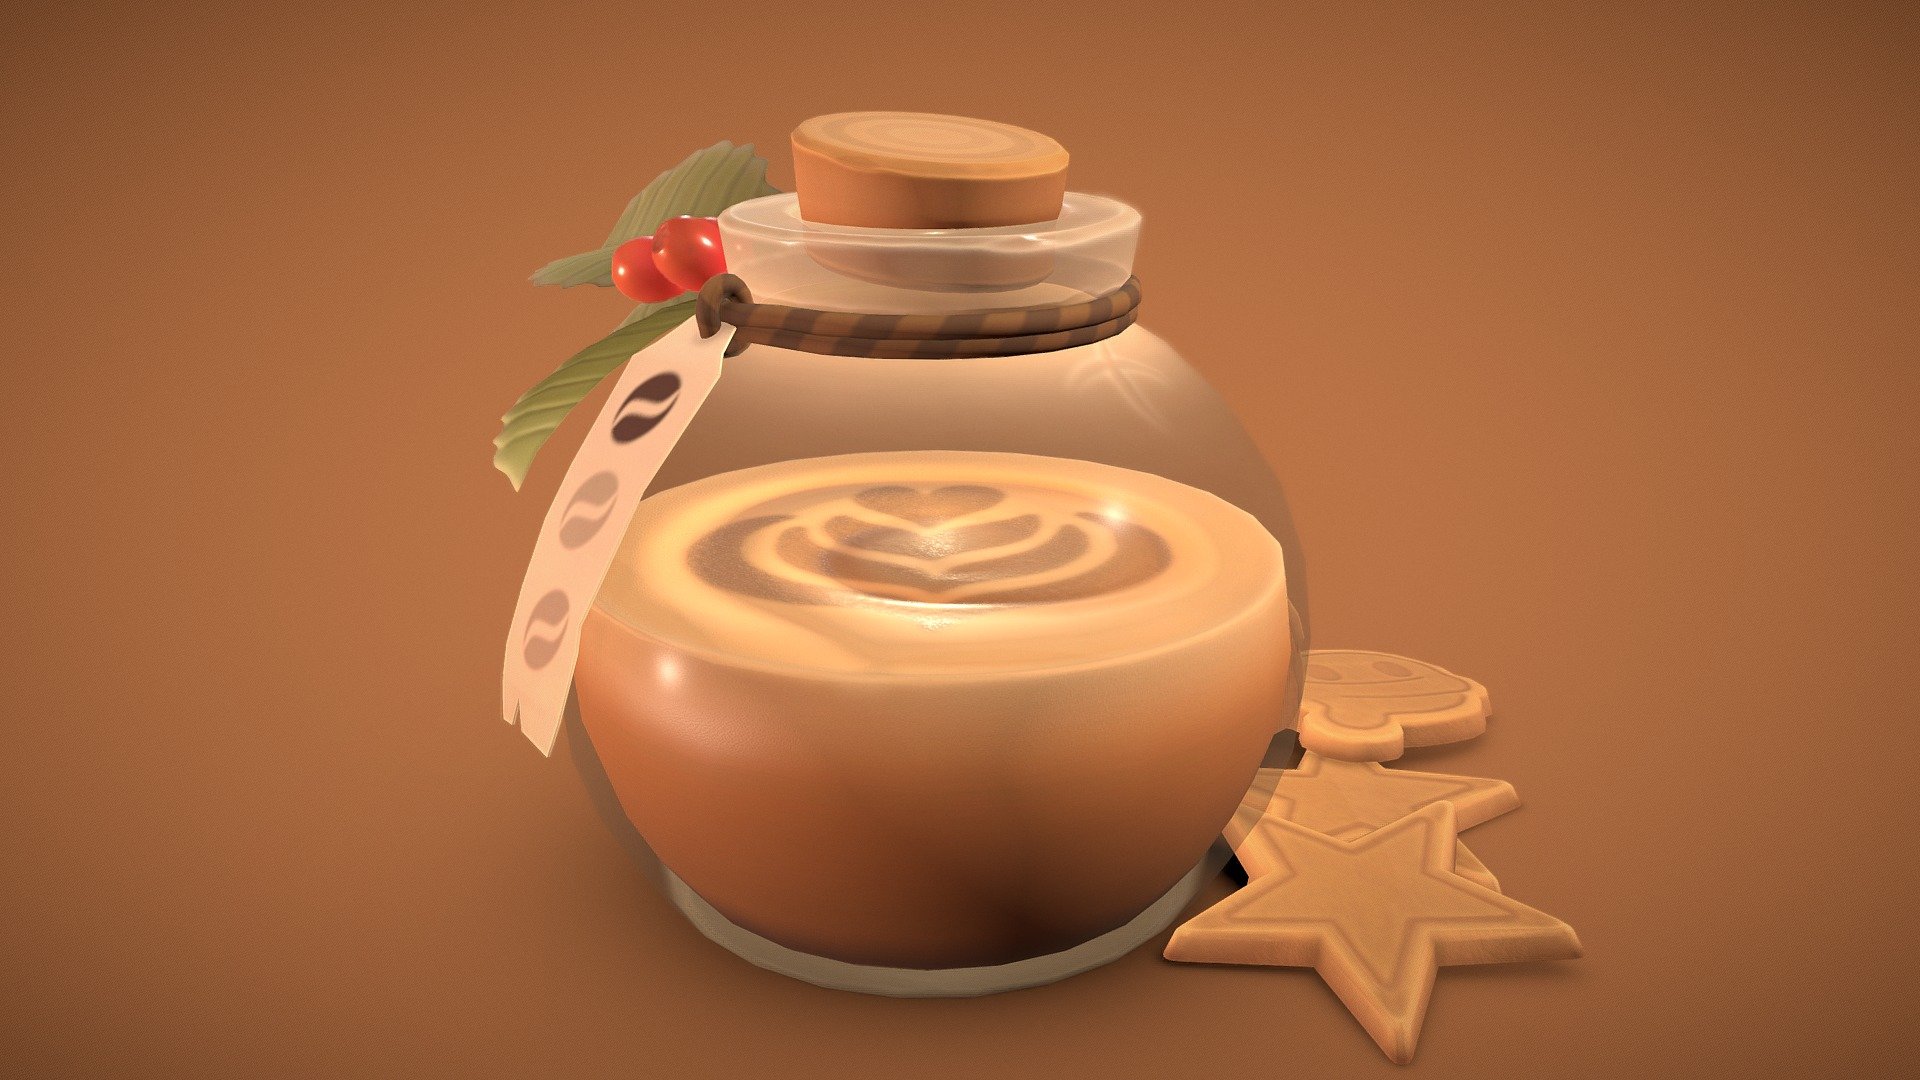 With cookies!
Check out the timelapse of this piece:
https://www.youtube.com/watch?v=wmFpi6NGtsc

For the Sketchfab Weekly Challenge, week 1.

Made with Blender and Substance Painter.




Twitter

YouTube

Artstation



suggocreations.com
 - Coffee Potion - 3D model by Suggo (@SuggoCreations) 3d model